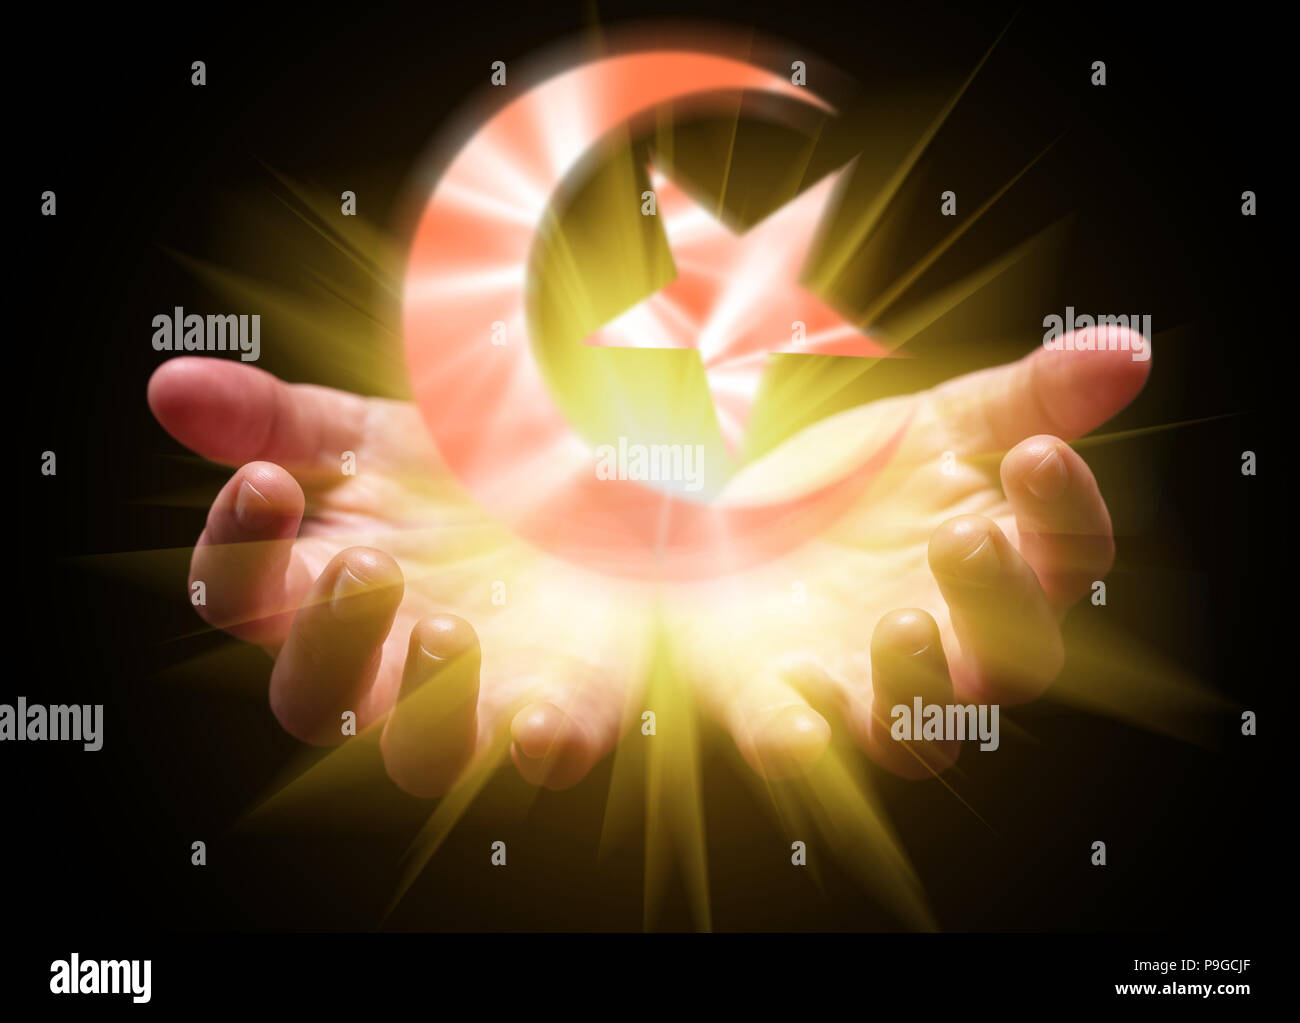 Hands cupped and holding or showing the Crescent. Moon and Star with bright, glowing, shining light. Concept for Islam, Islamic, Muslim, Arab, Arabic, Stock Photo